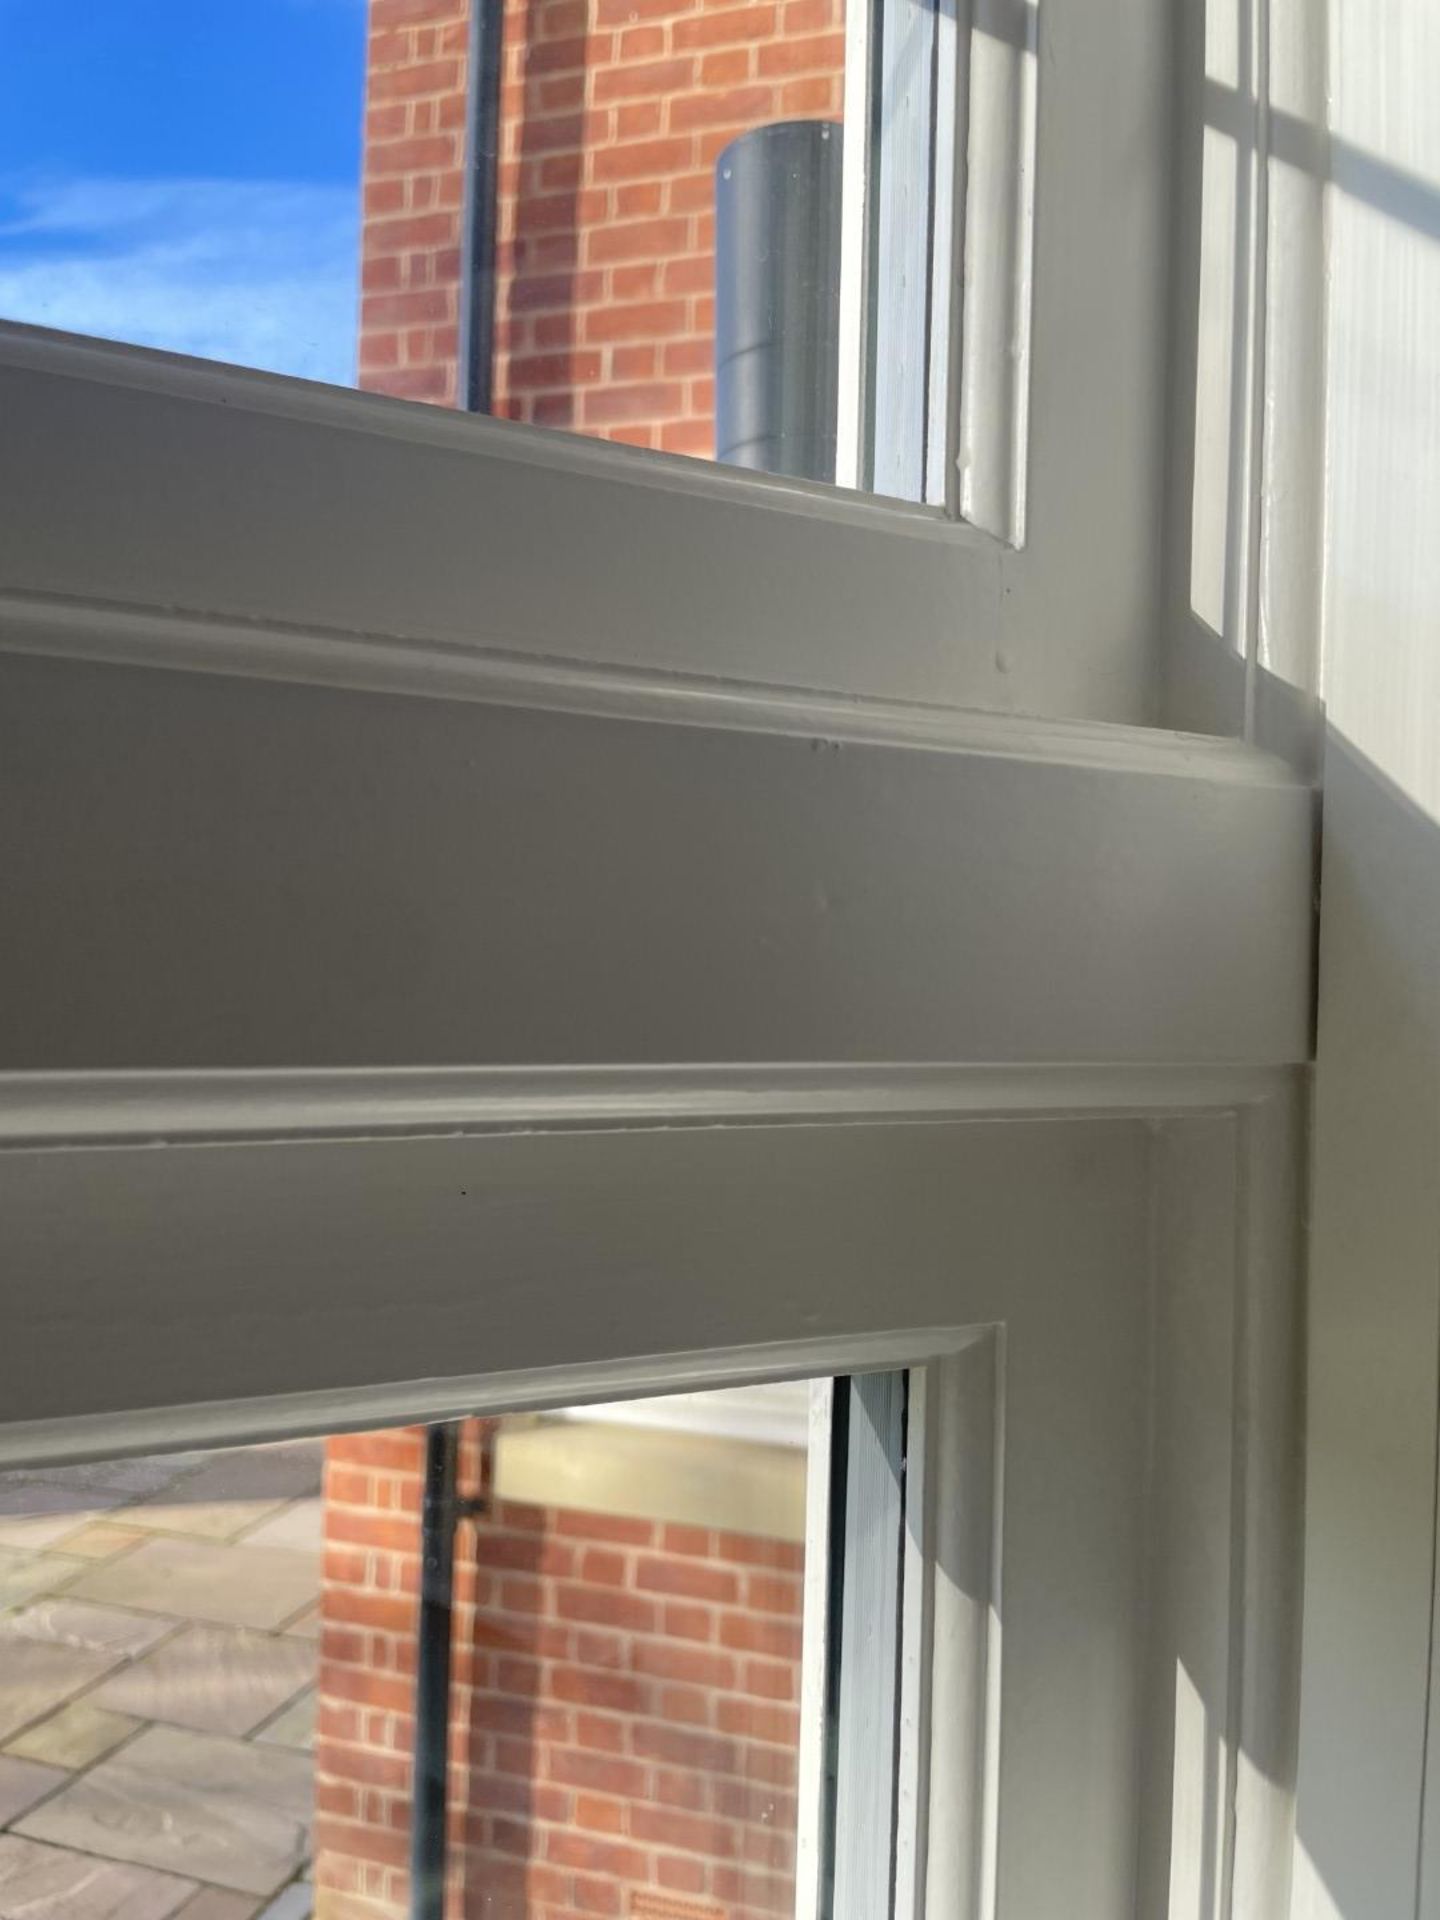 1 x Hardwood Timber Double Glazed Window Frames fitted with Shutter Blinds, In White - Ref: PAN104 - Image 6 of 12